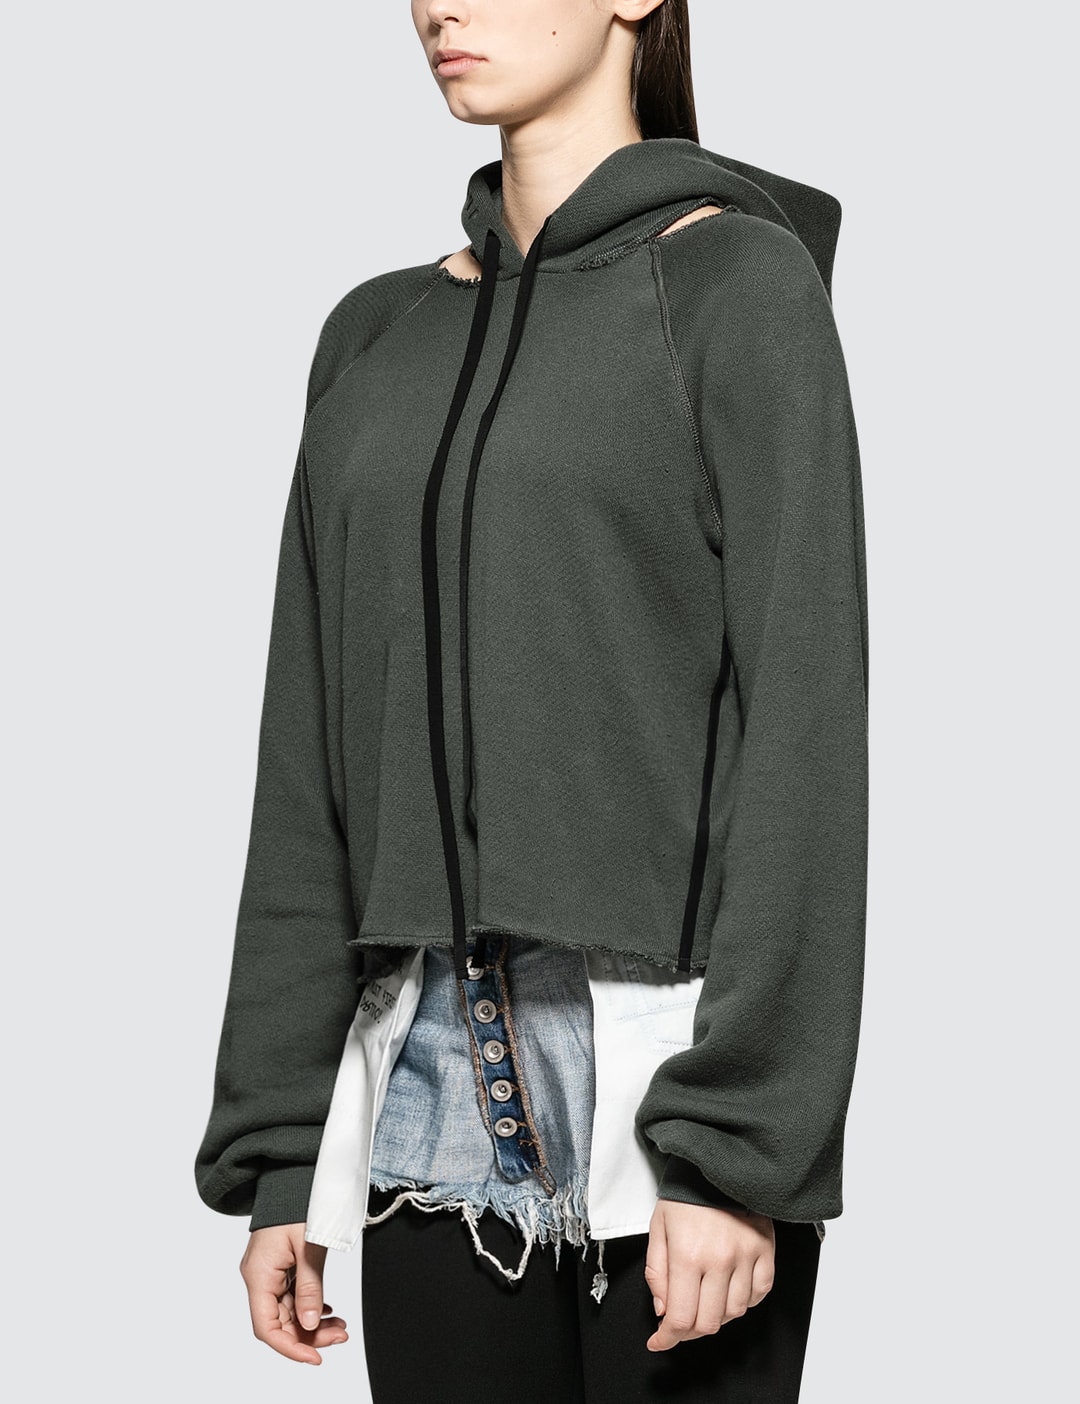 Unravel Project - Cot Cashmere Hoodie Cut | HBX - Globally Curated ...